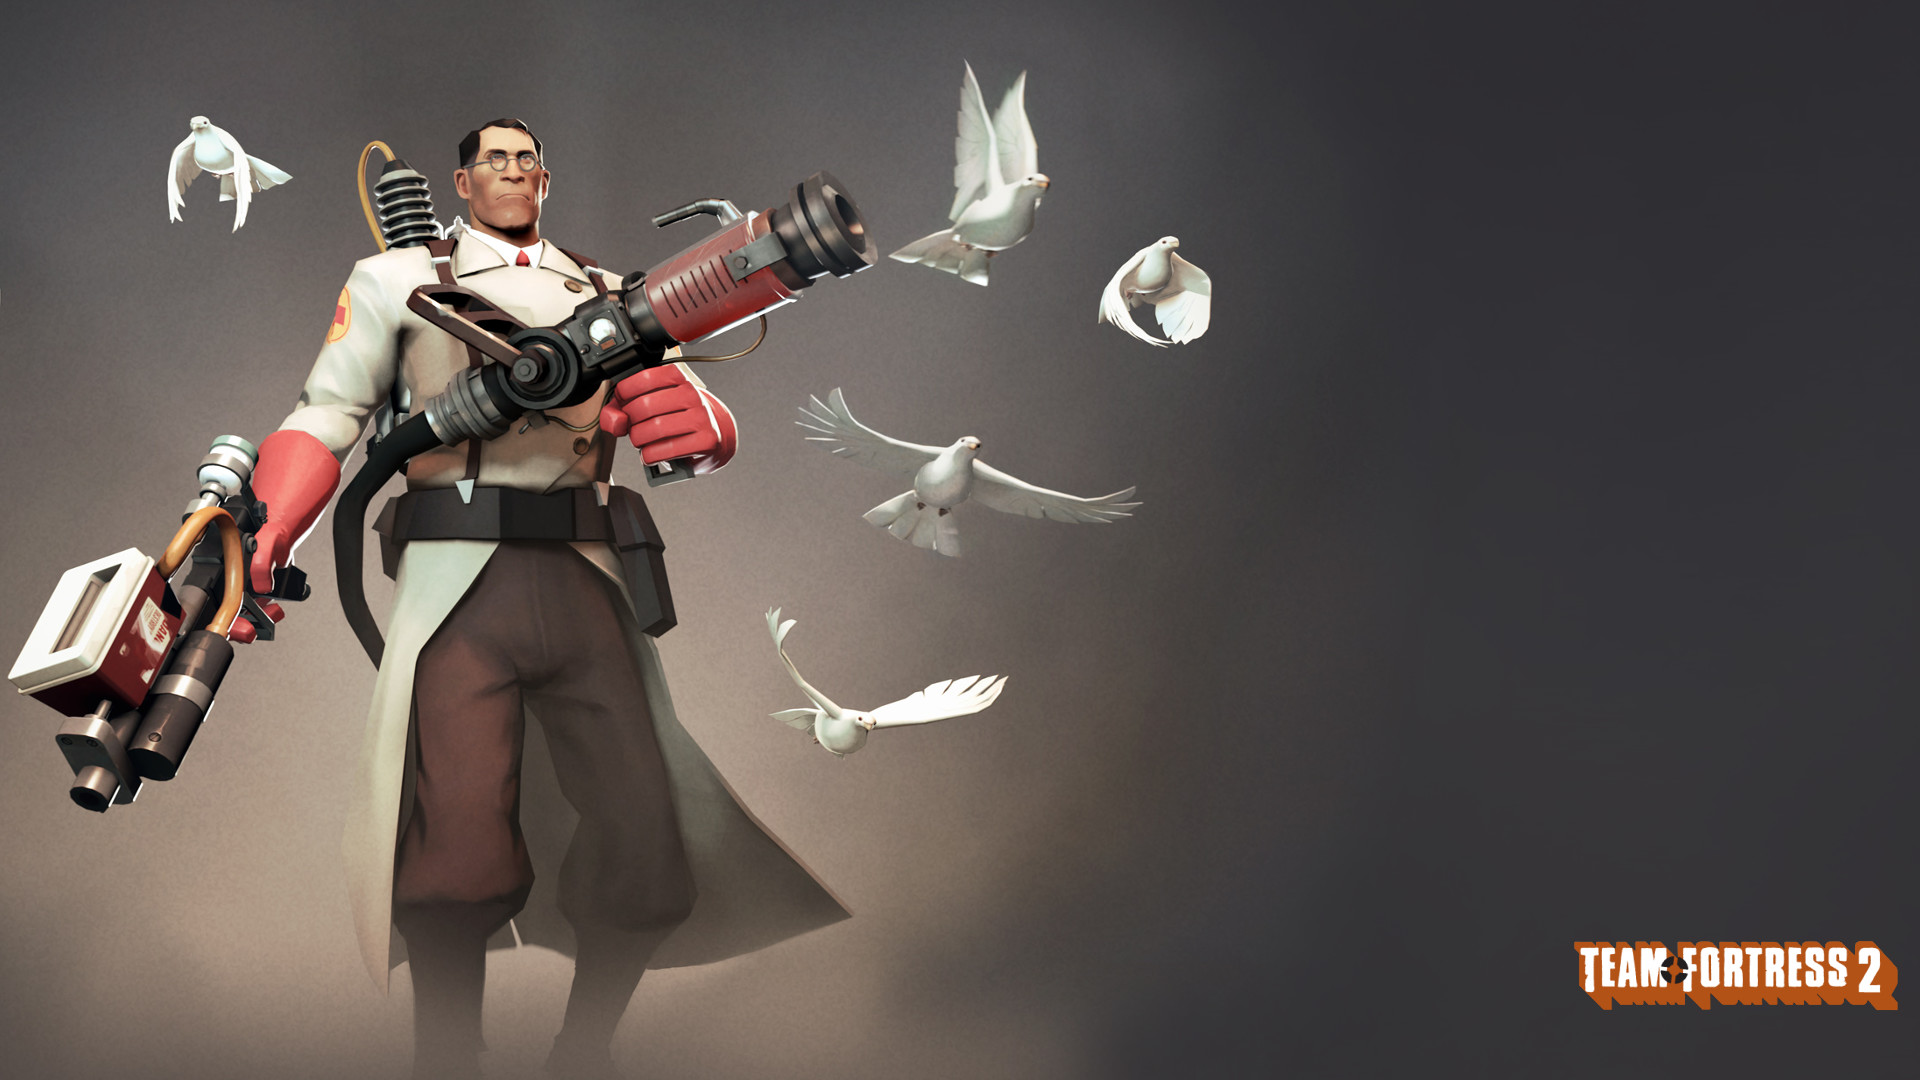 1920x1080 Team Fortress 2 Engineer Wallpapers - Wallpaper Cave | Android | Pinterest  | Team fortress and Wallpaper